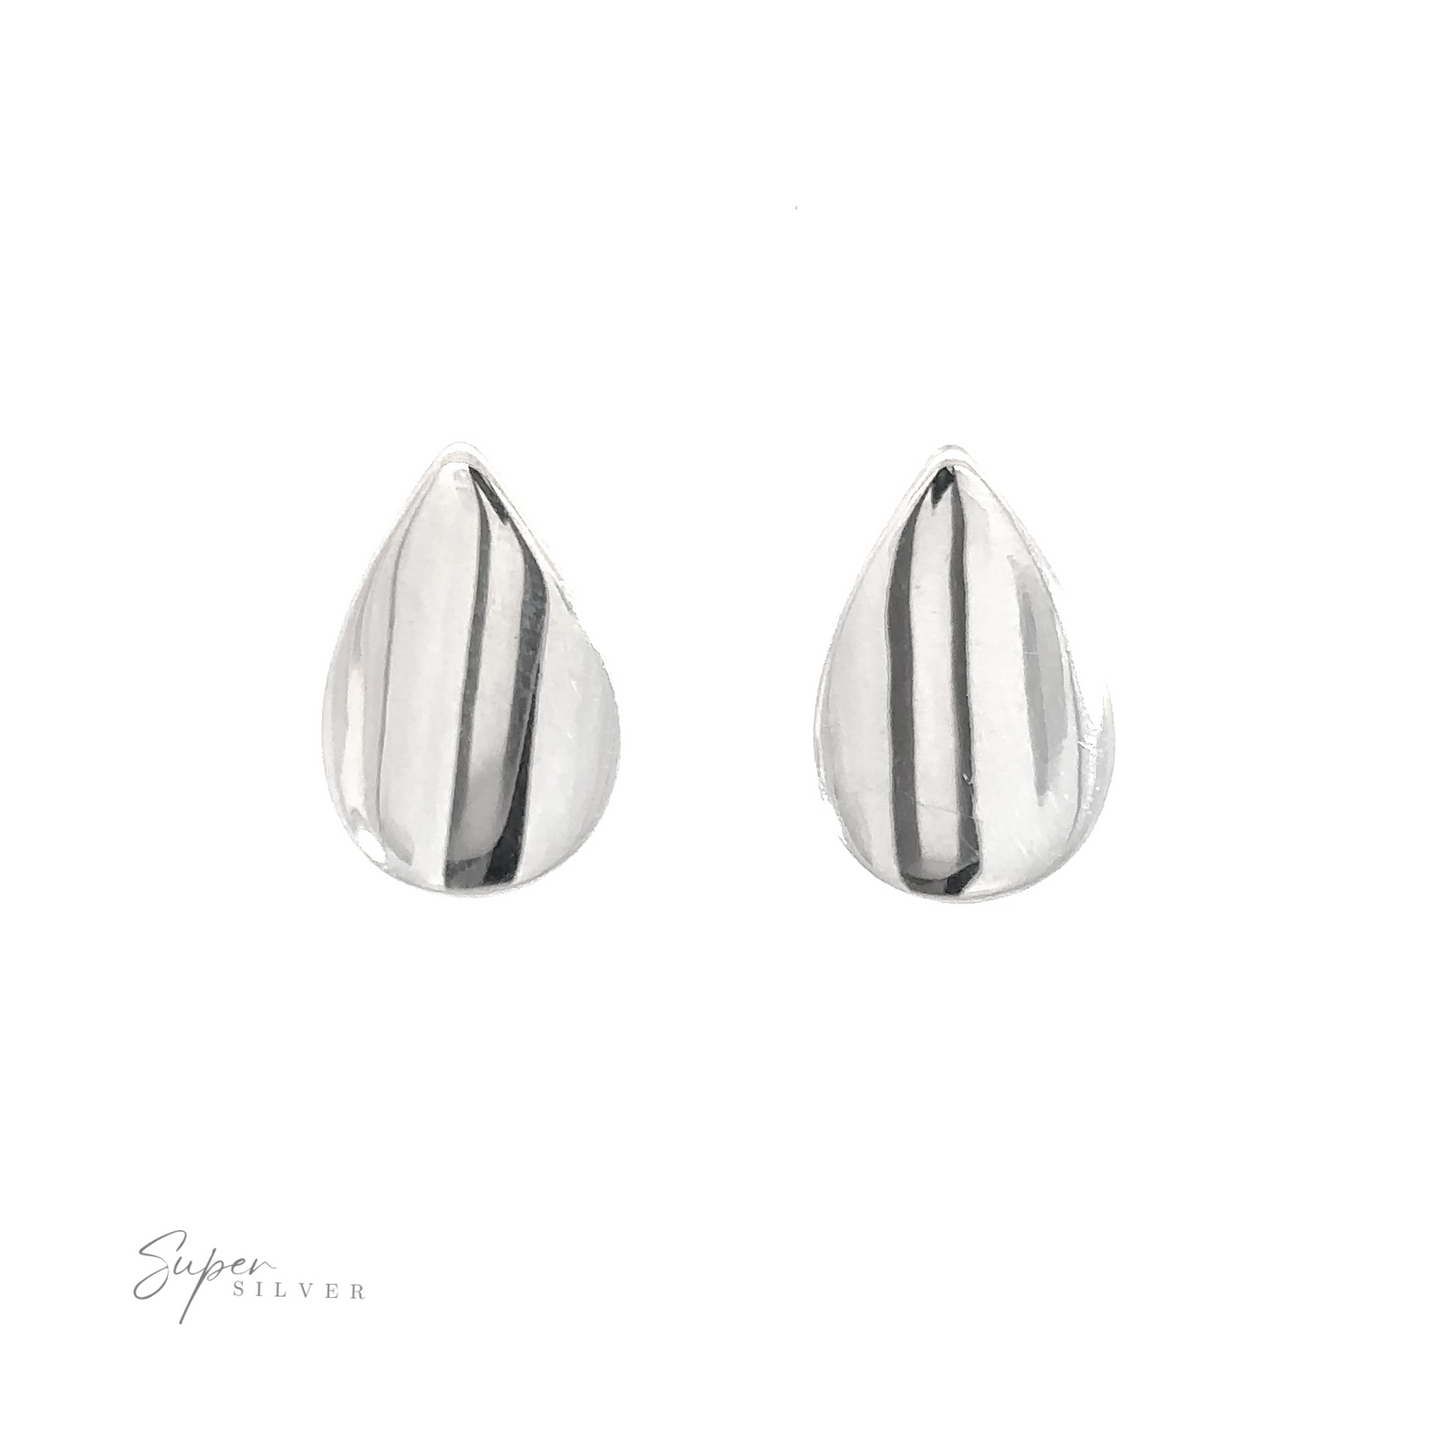 Sophisticated Modern Teardrop Studs on white background.